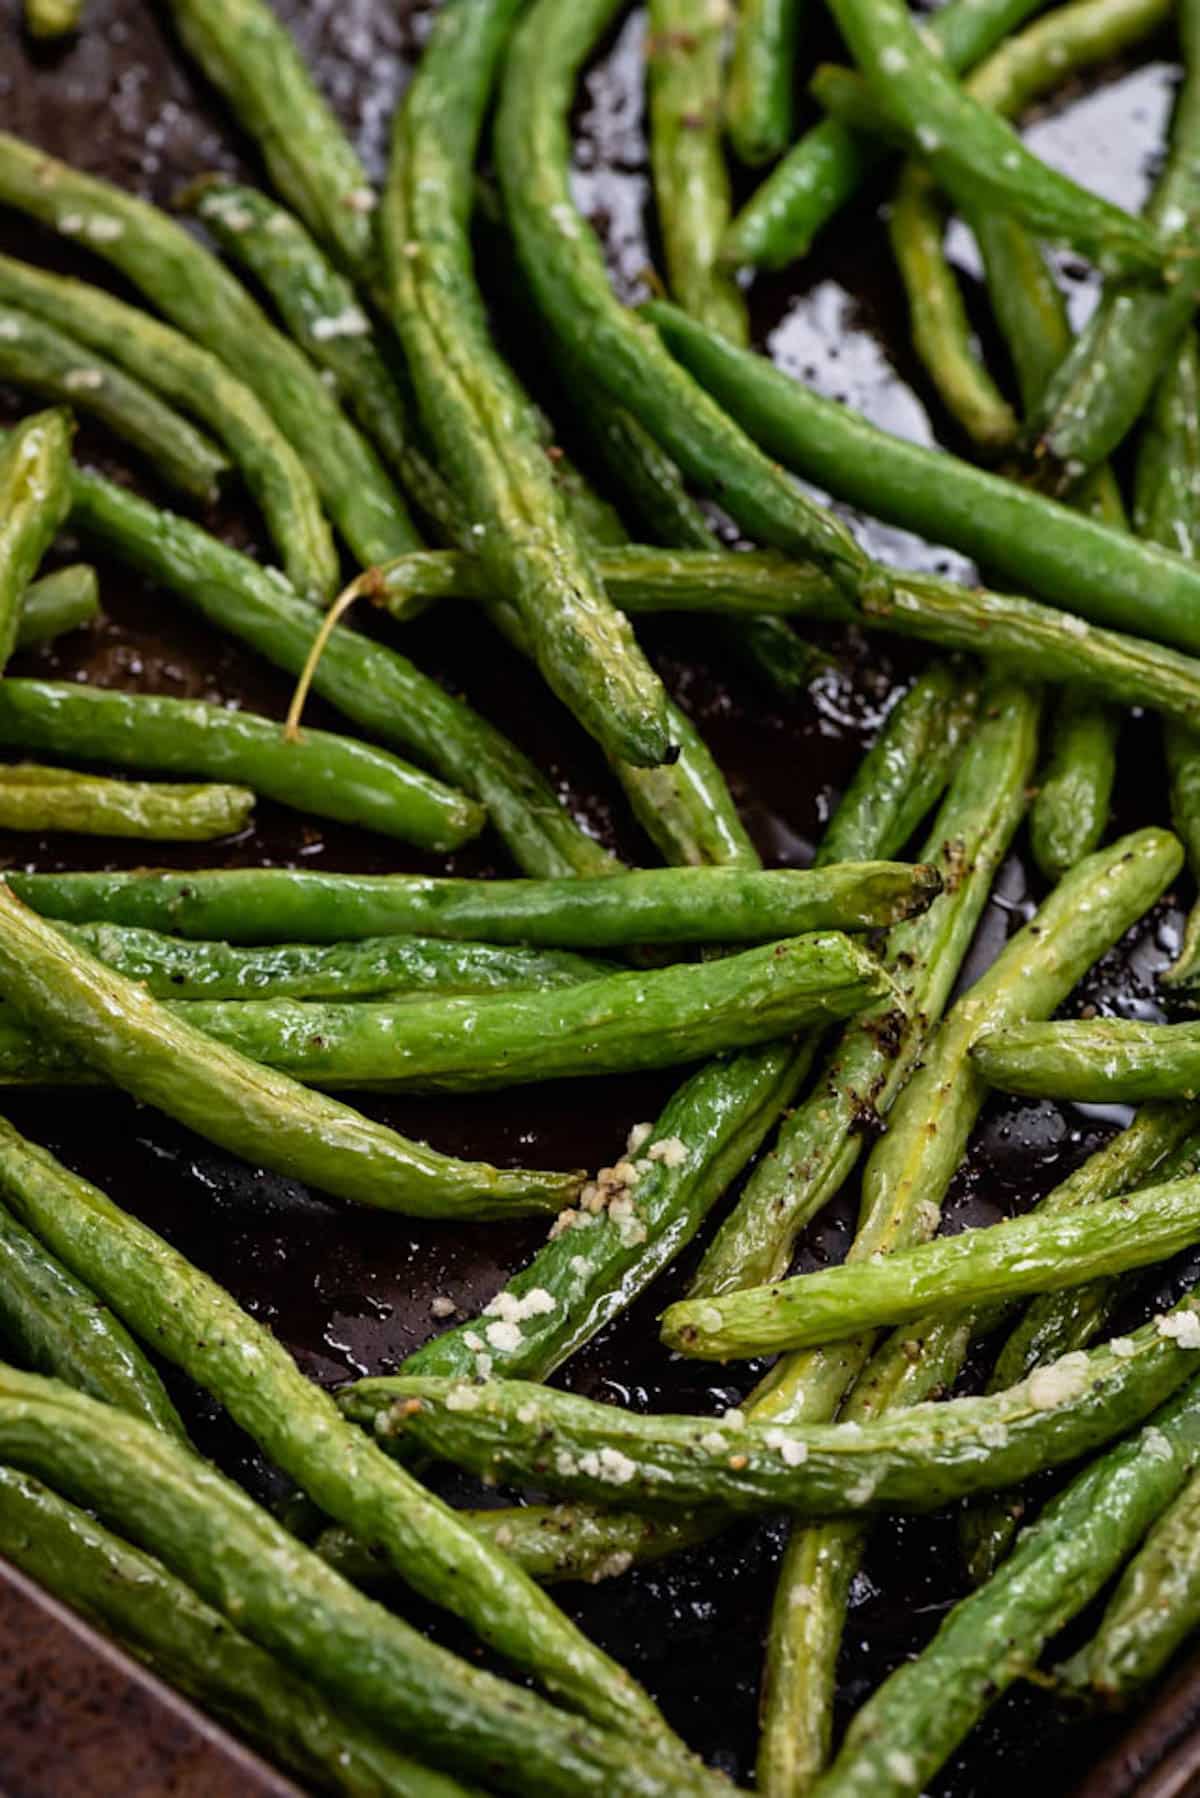 Easy Roasted Garlic Green Beans - Crazy for Crust